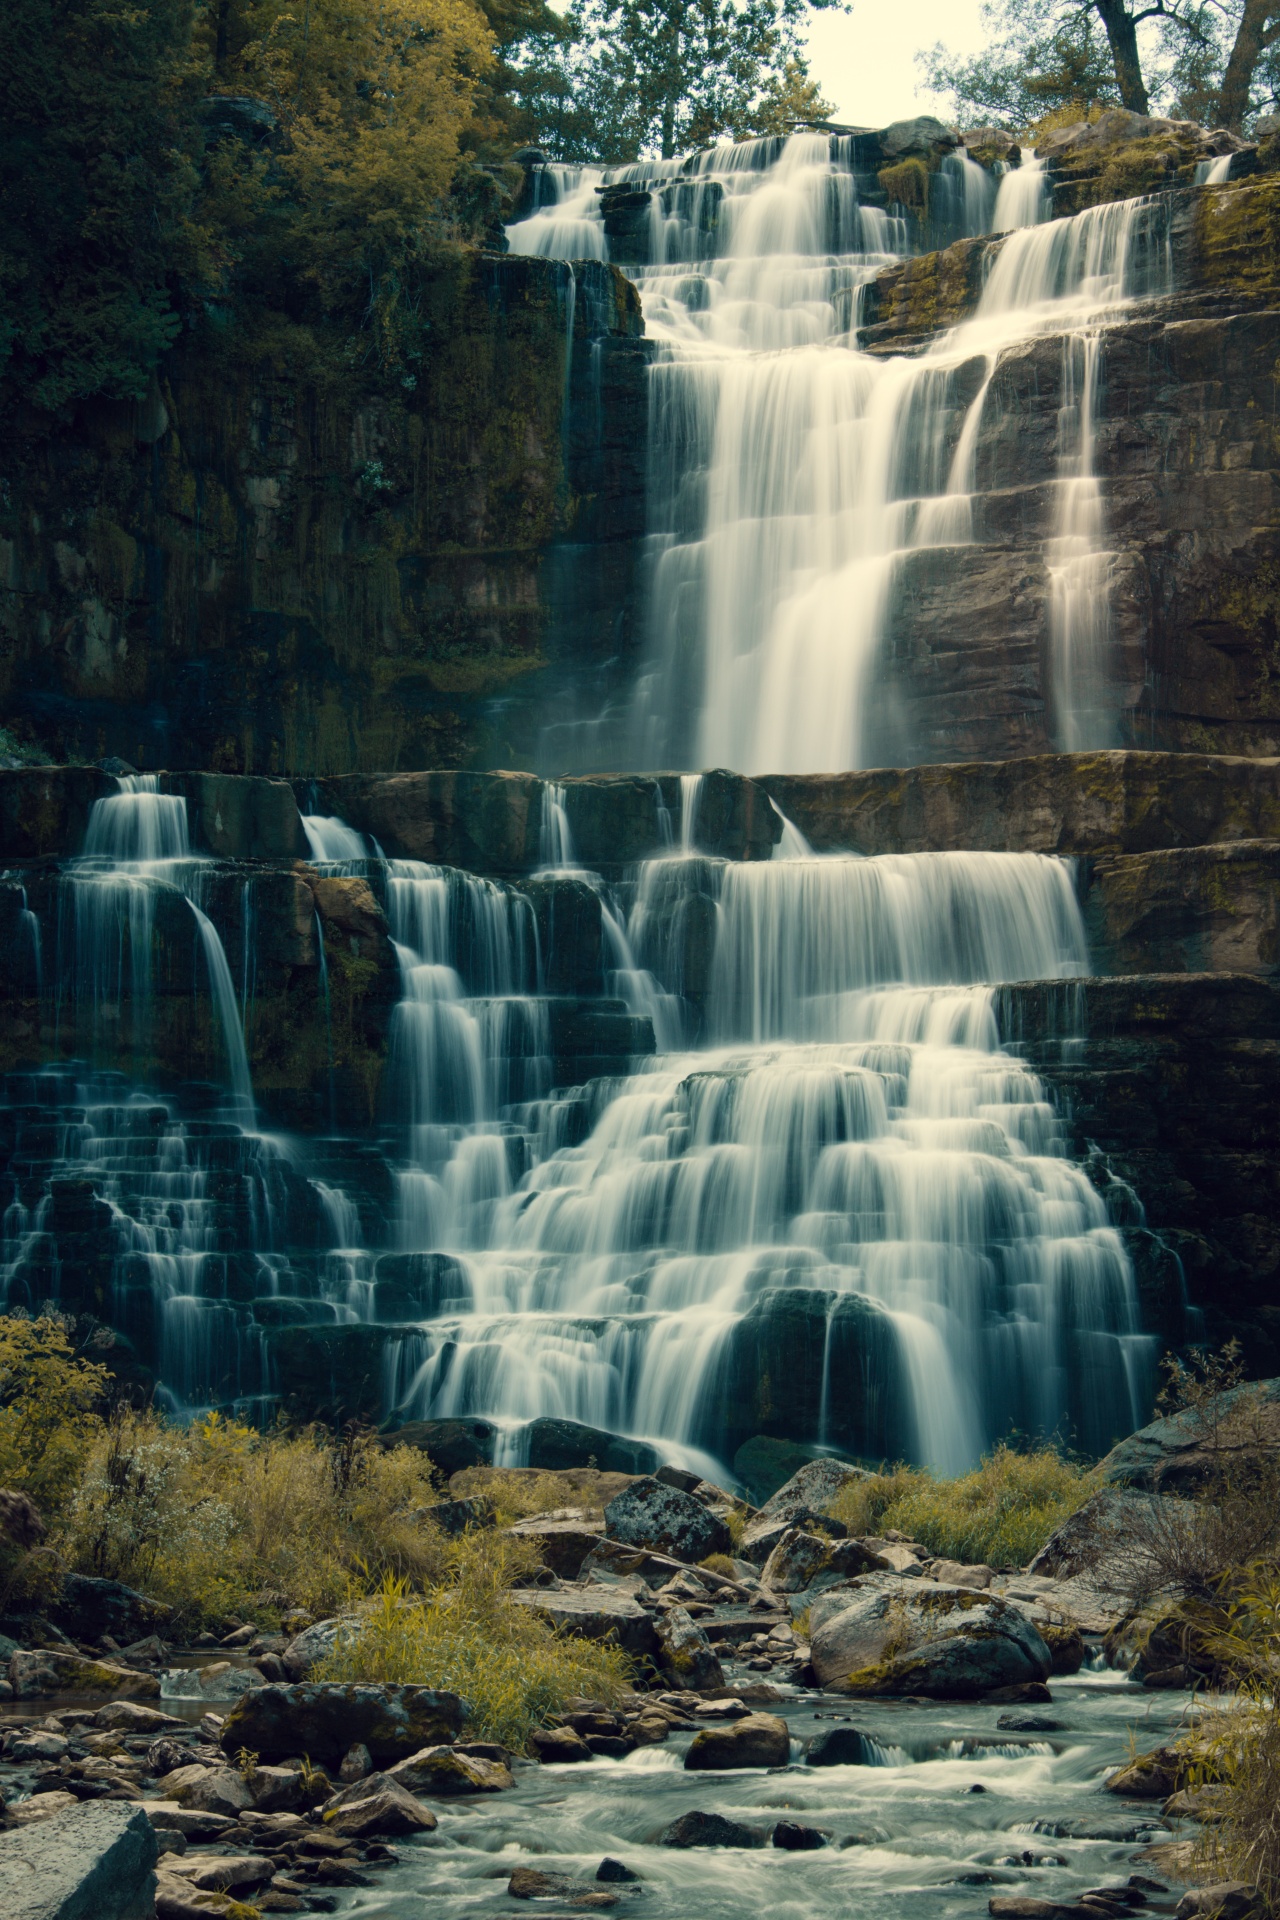 Chittenango Falls in New York state in the United States